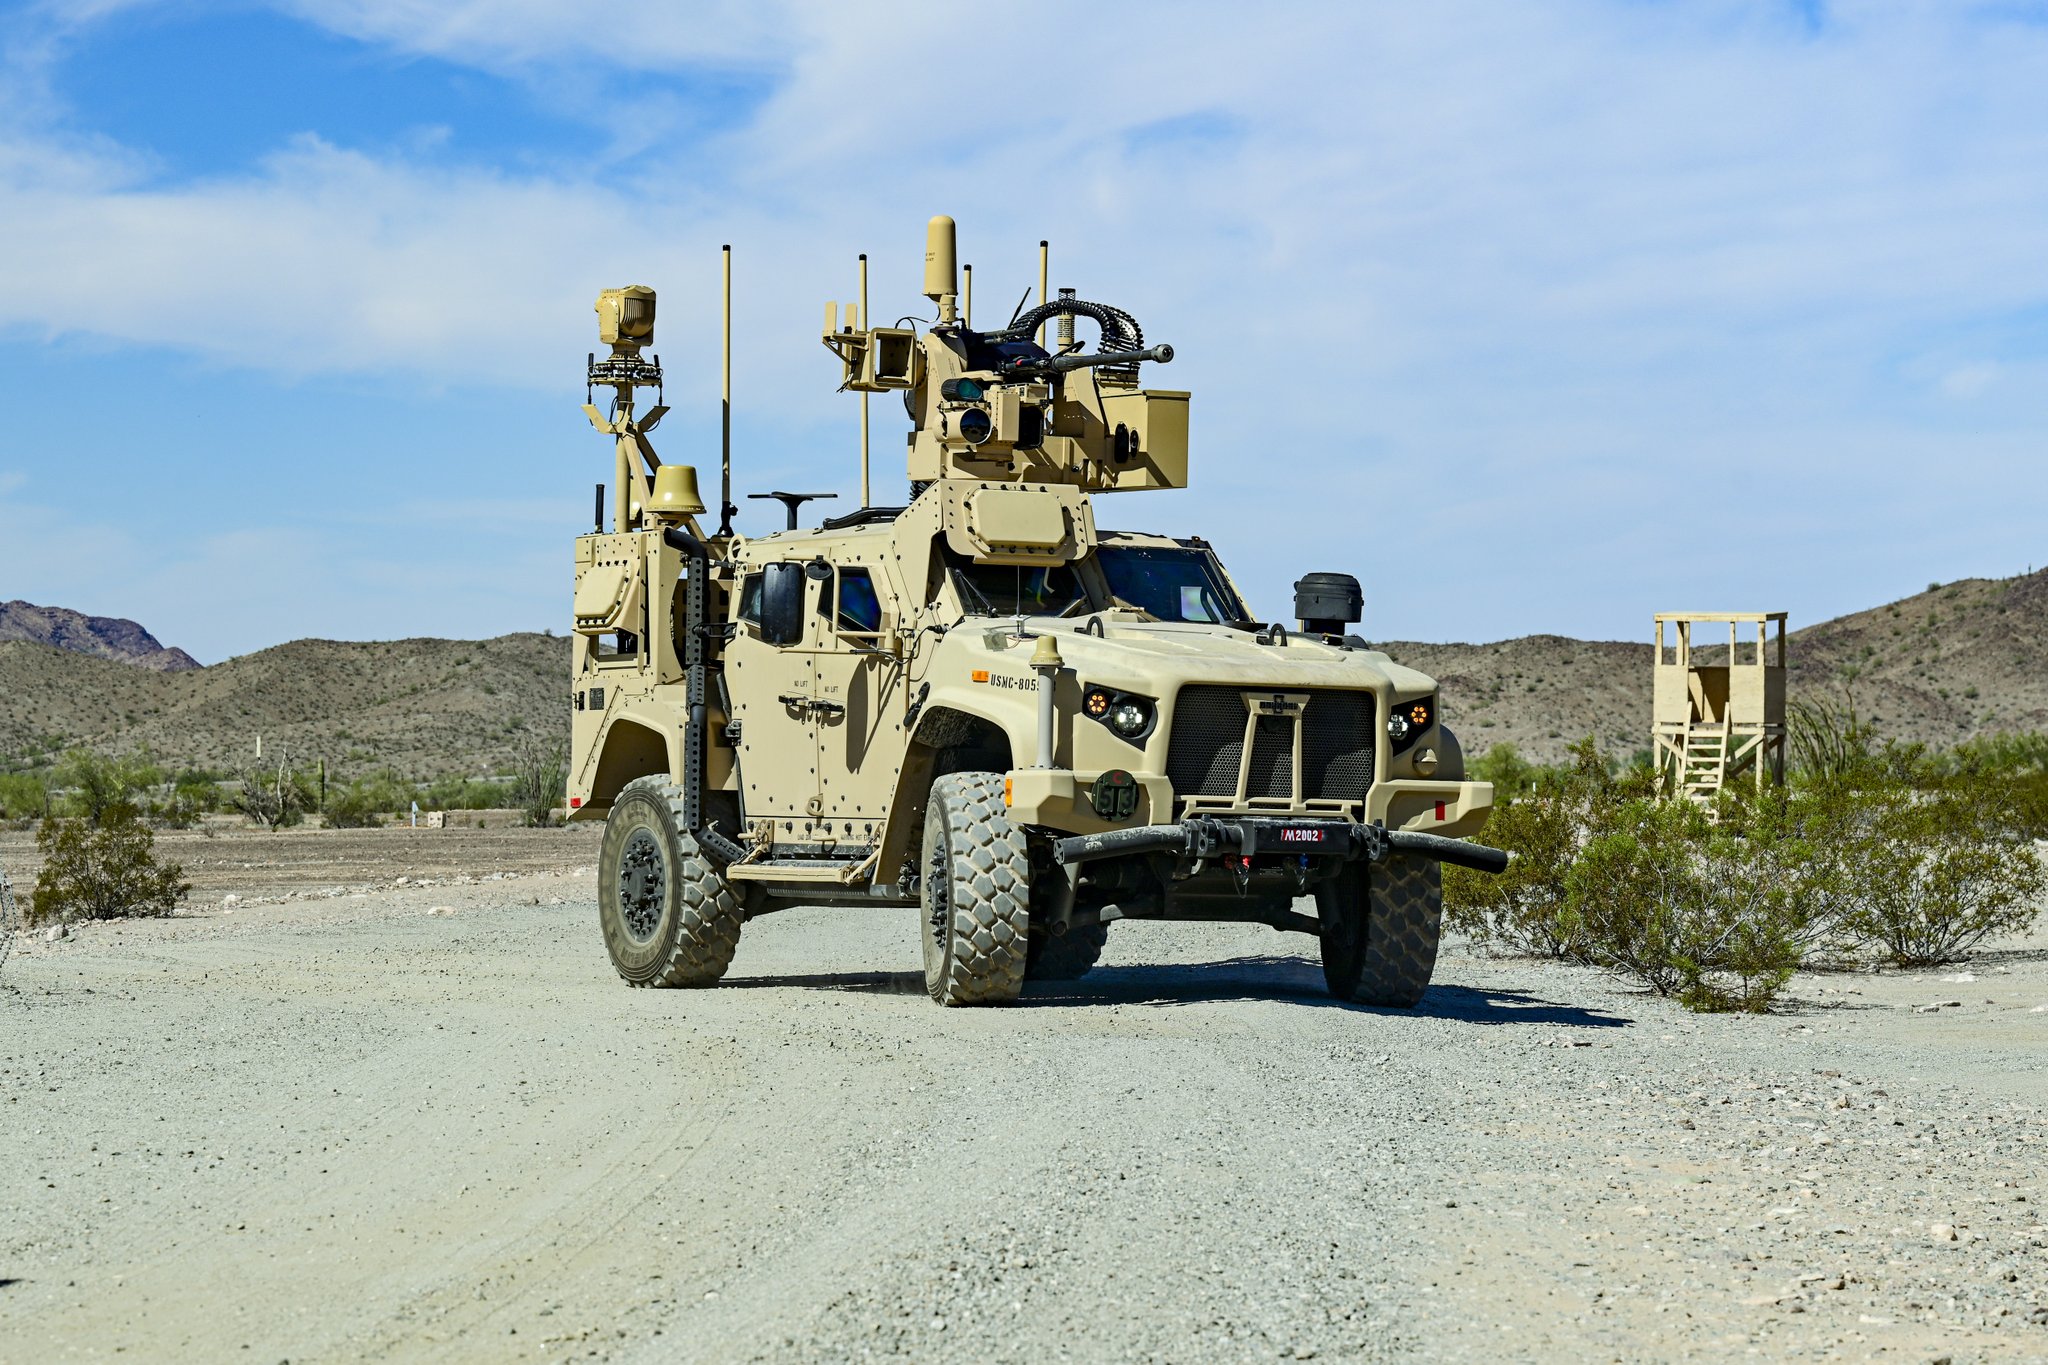 The US Marine Corps has tested the MADIS Mk 1 air defence system with Stinger missiles